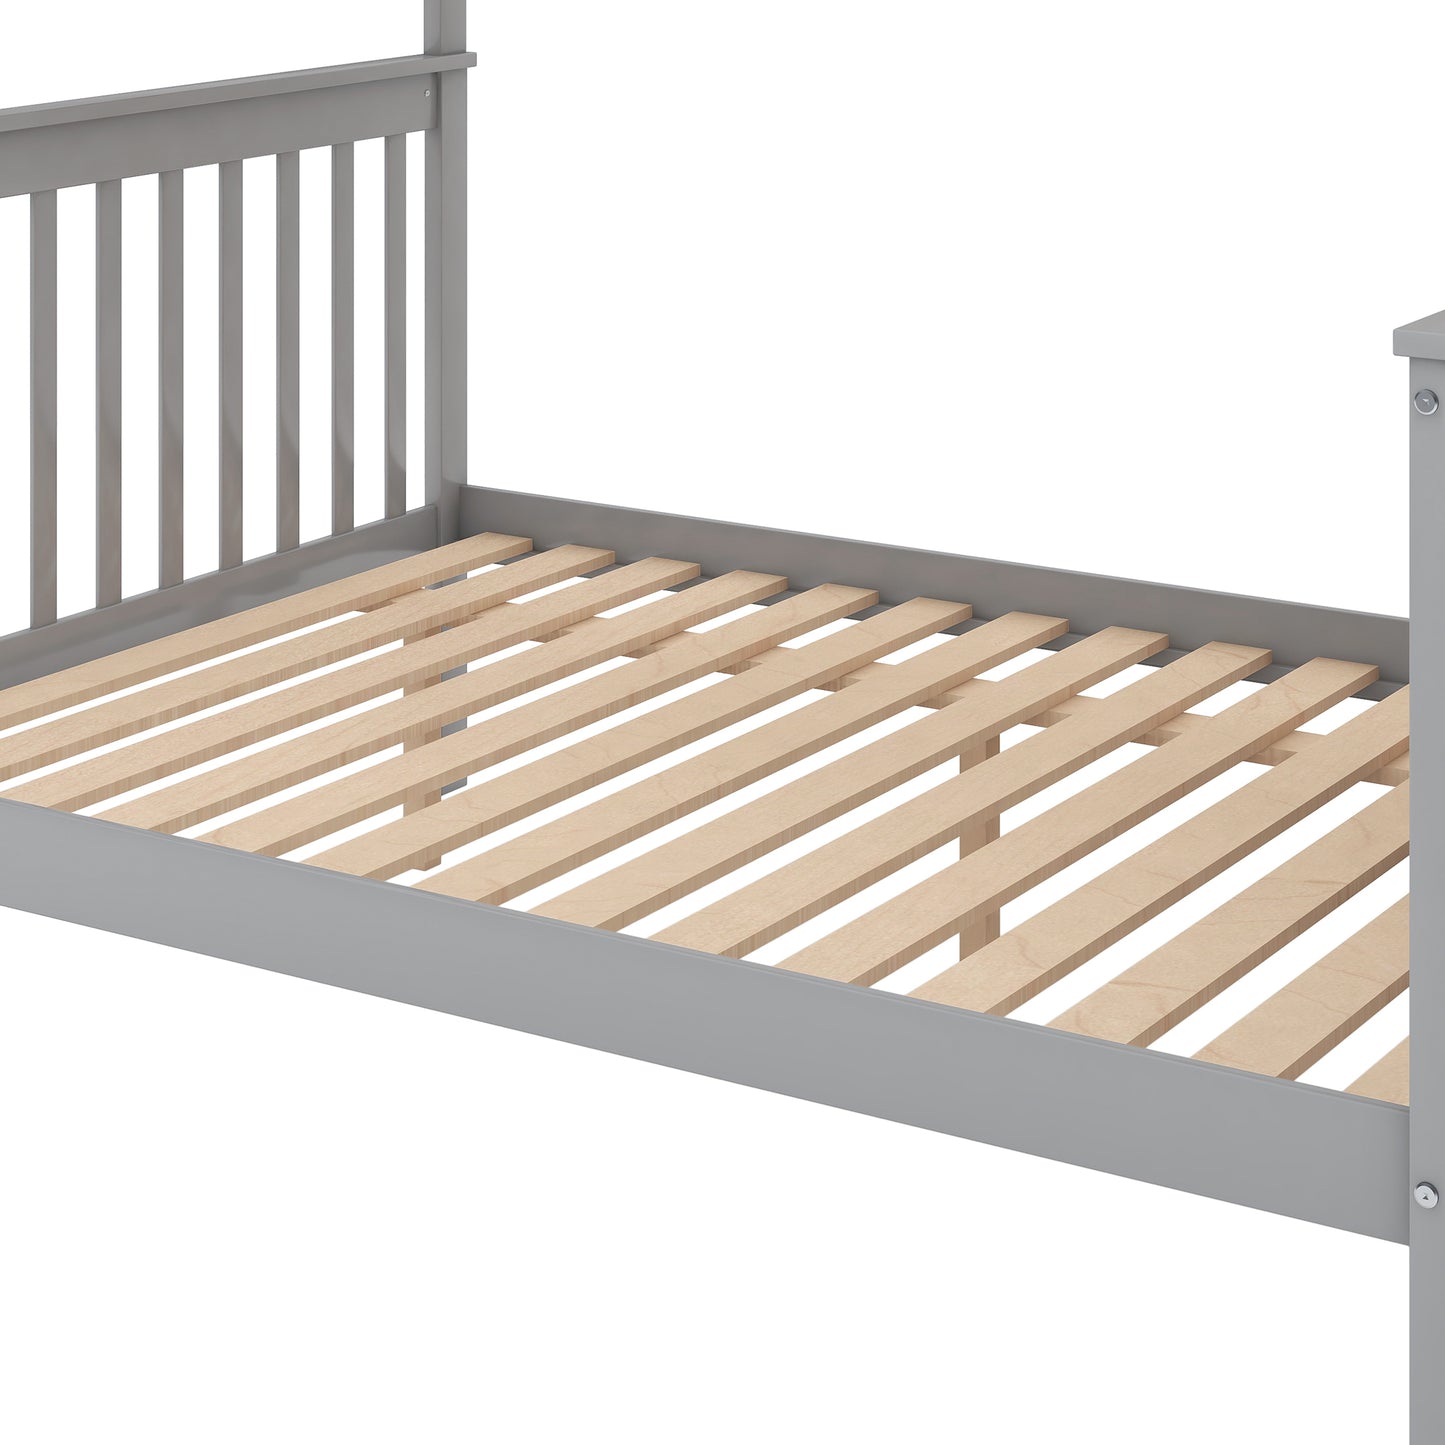 Twin over Full Bunk Bed with Trundle and Staircase,Gray